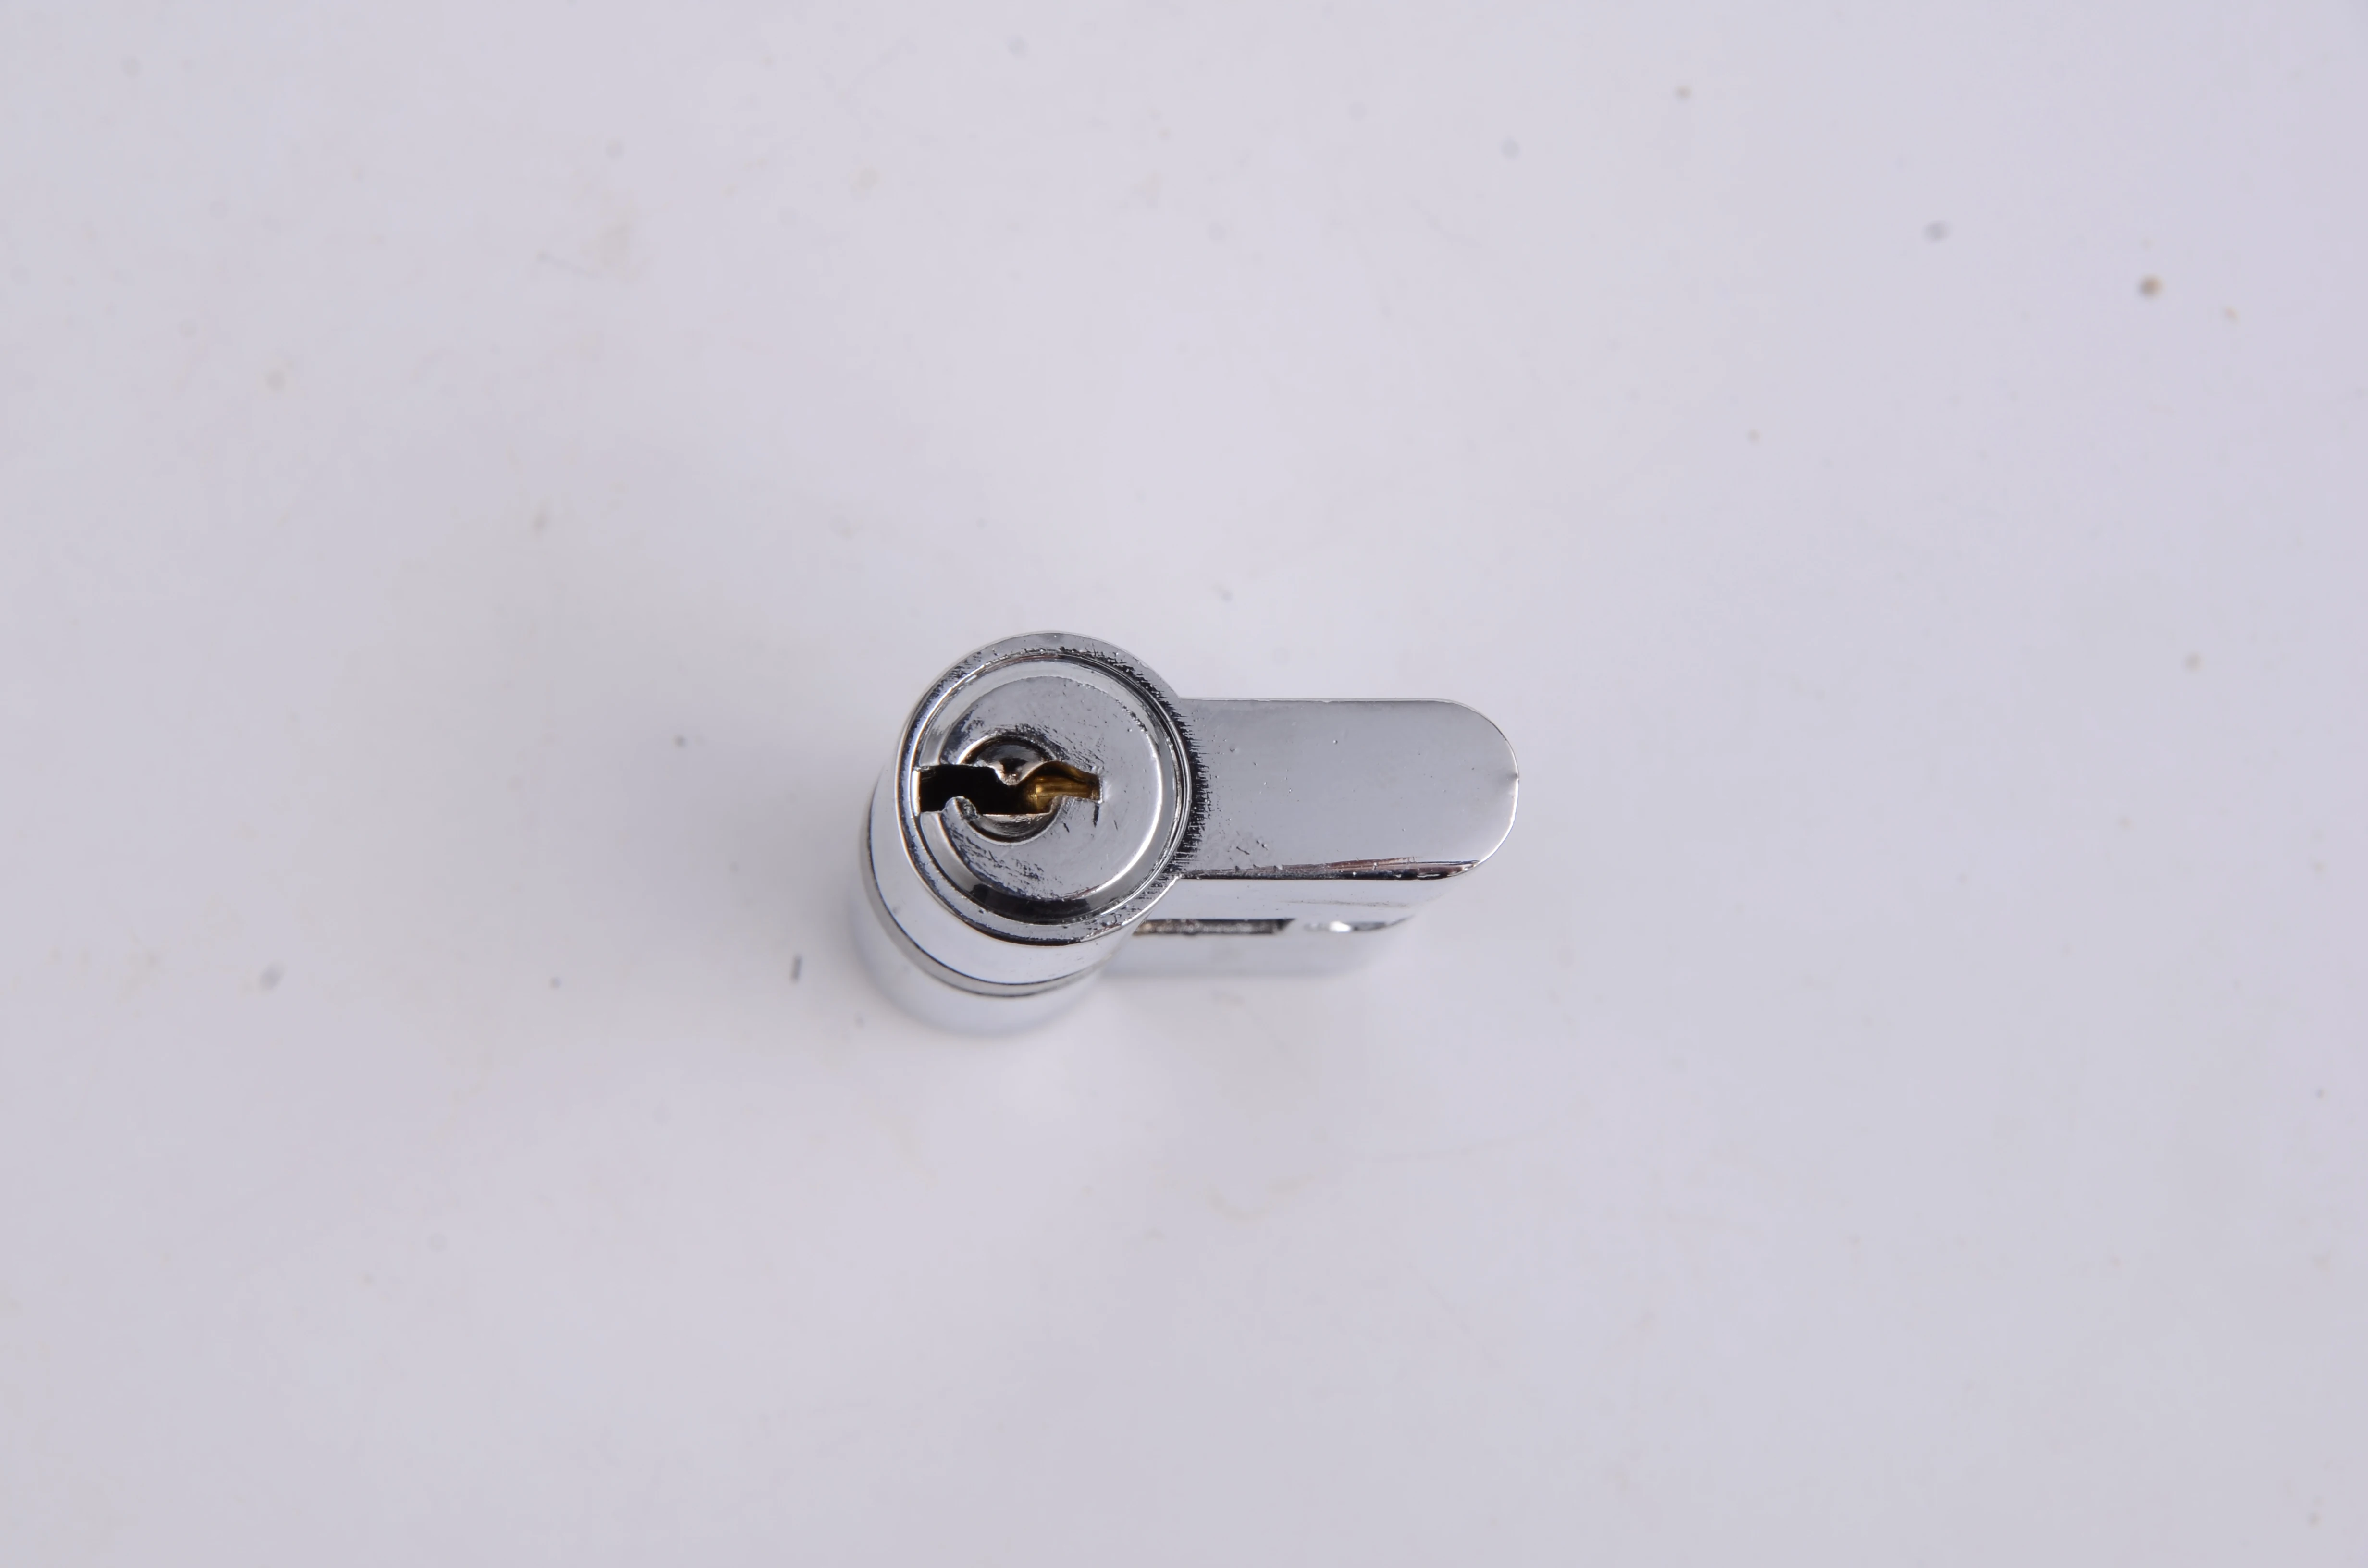 factory price mortise electronic tun knob double openning zinc alloy/brass door lock cylinder lock core with key